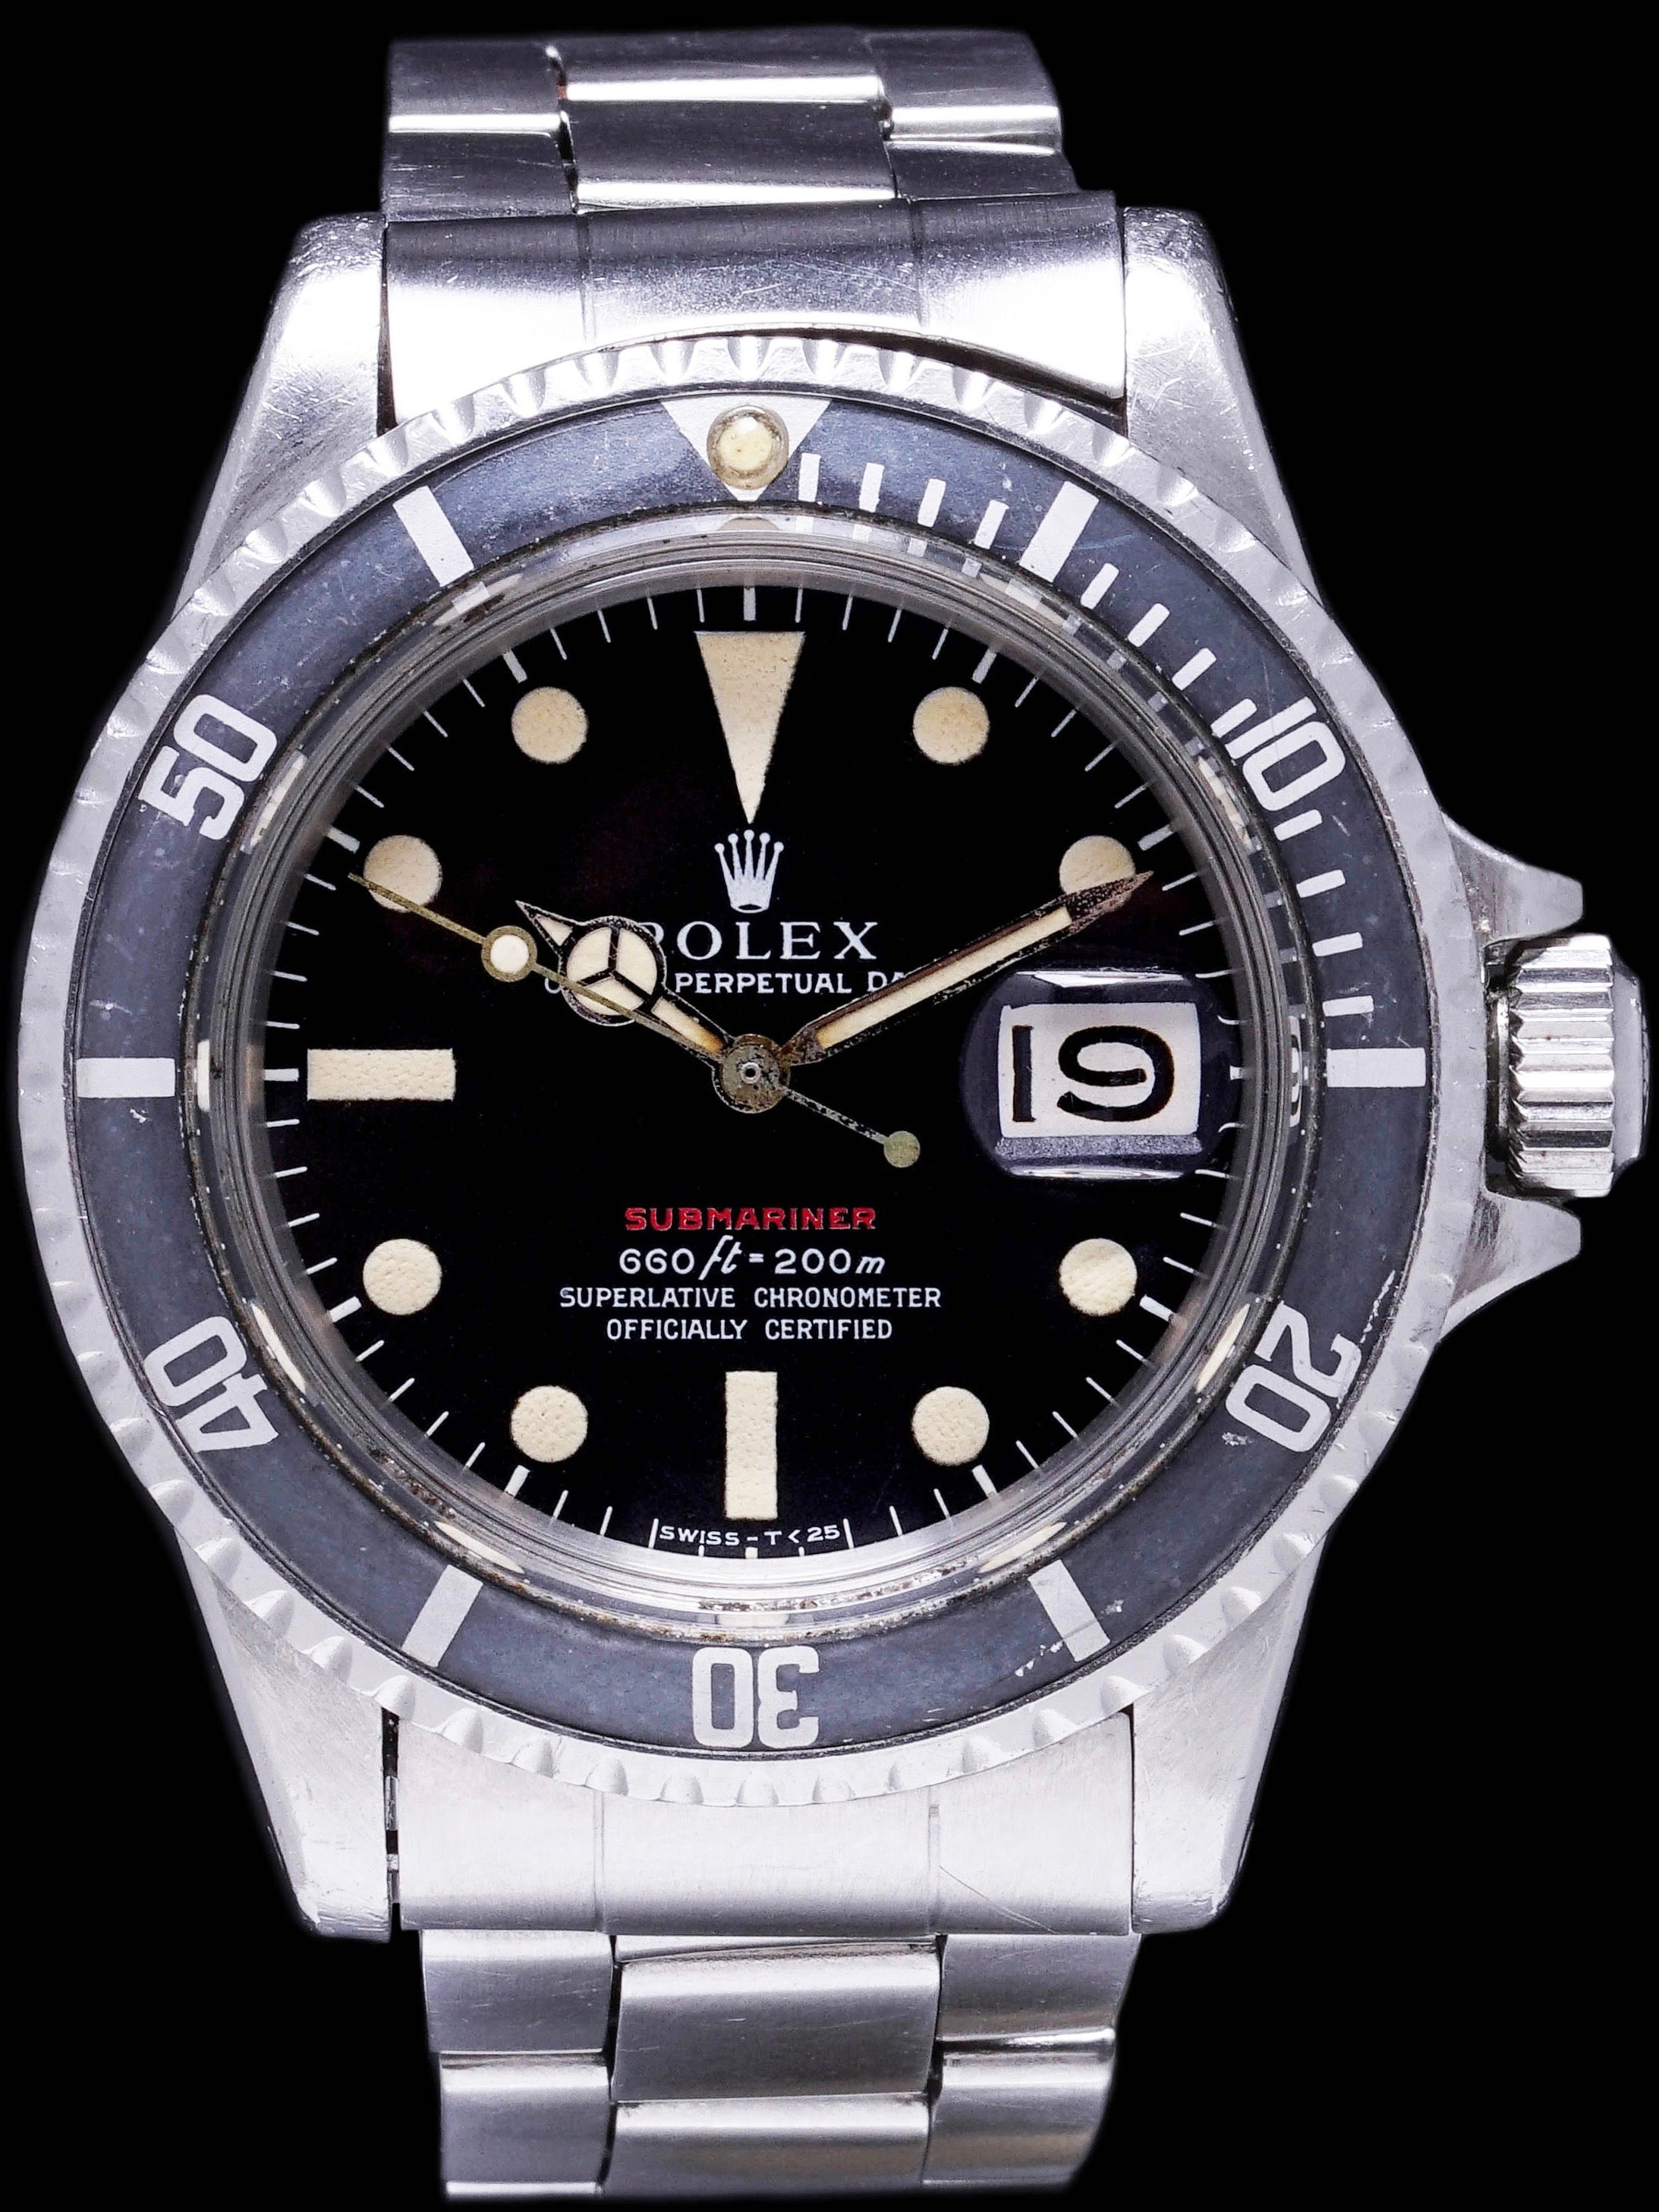 1970 Rolex Red Submariner (Ref. 1680) "Mk. IV Dial" With Box and Papers